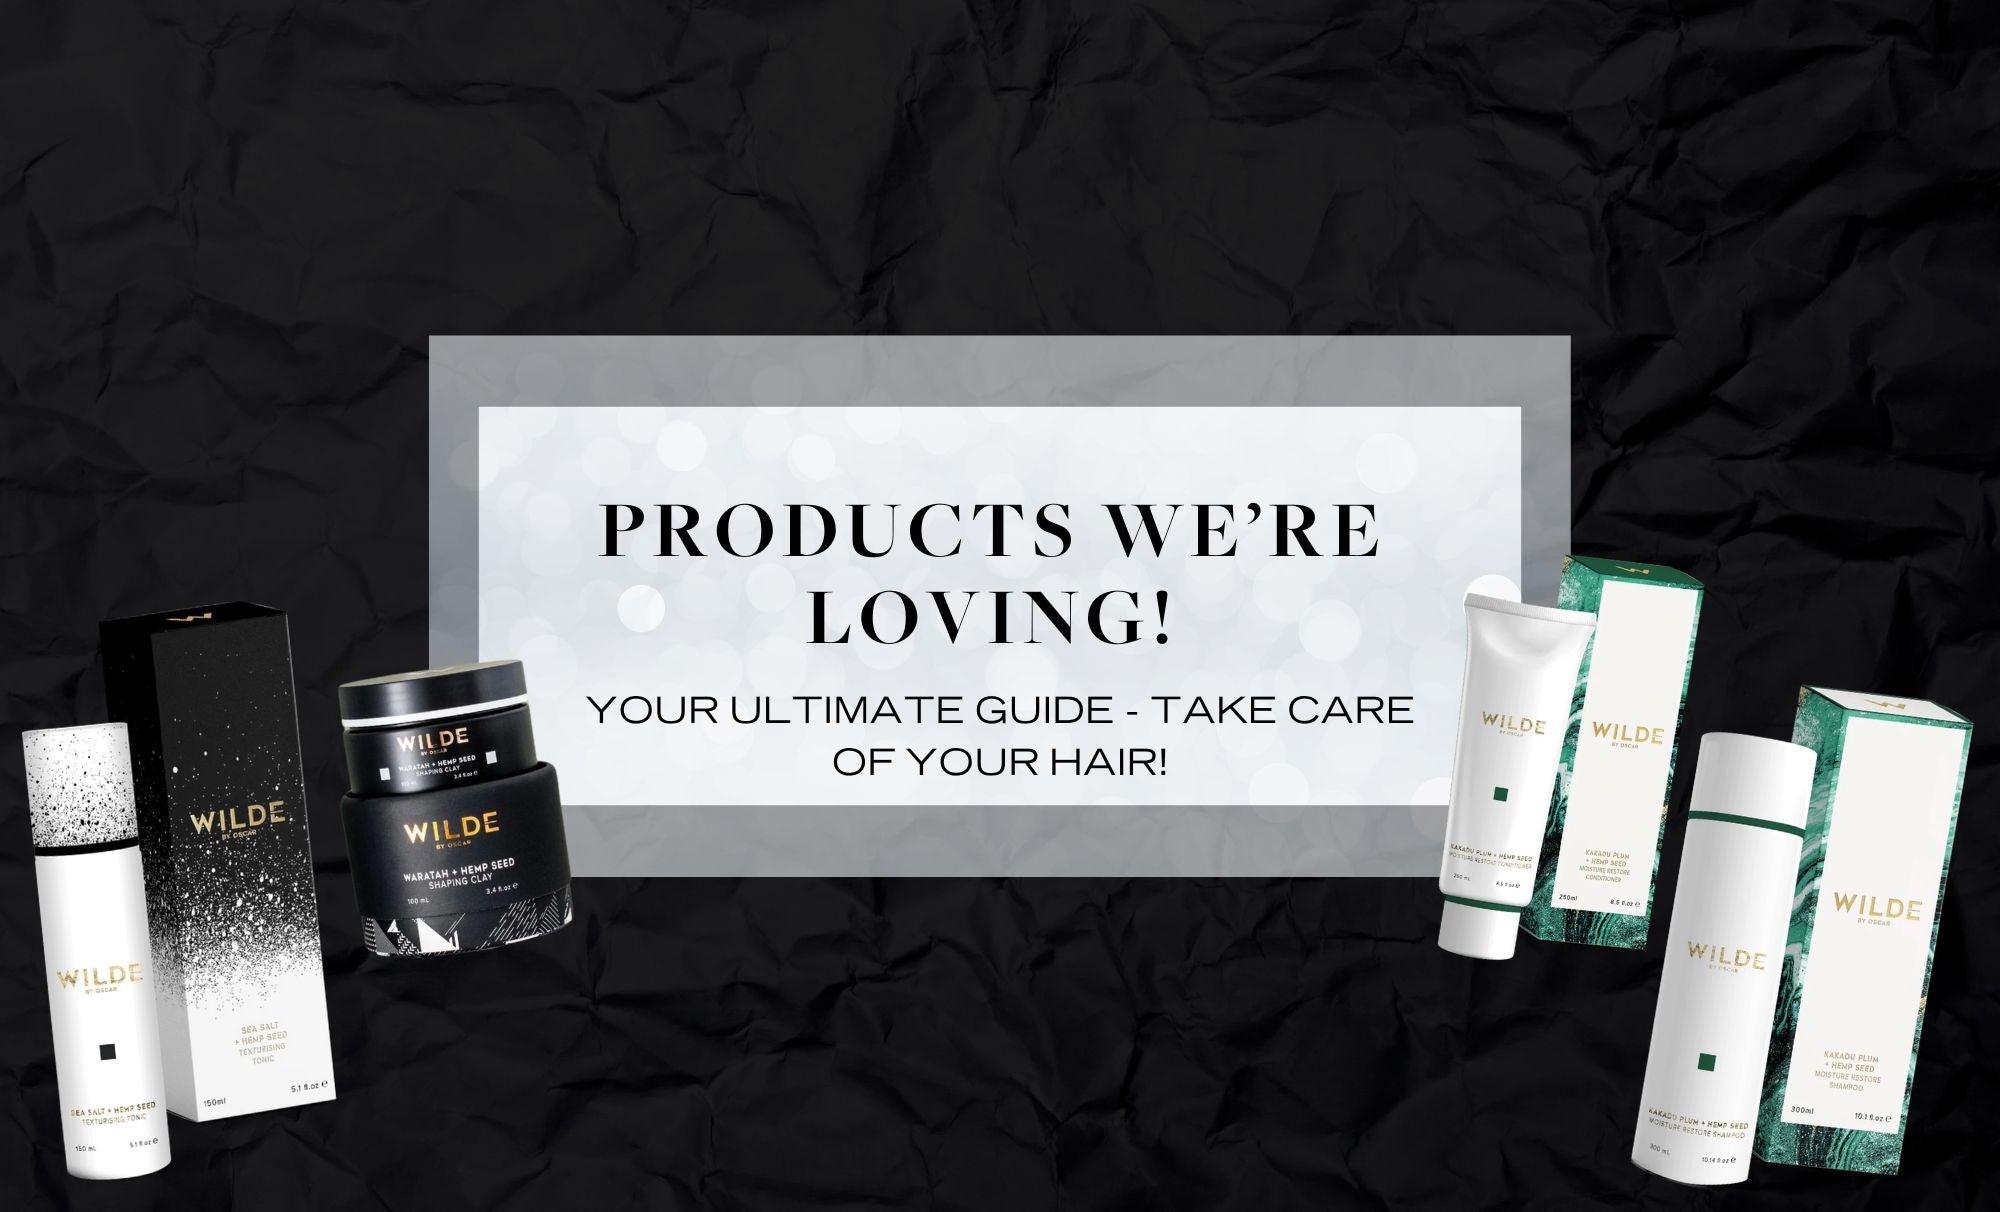 Products we're loving! Your ultimate hair care guide. - Oscar Oscar Salons